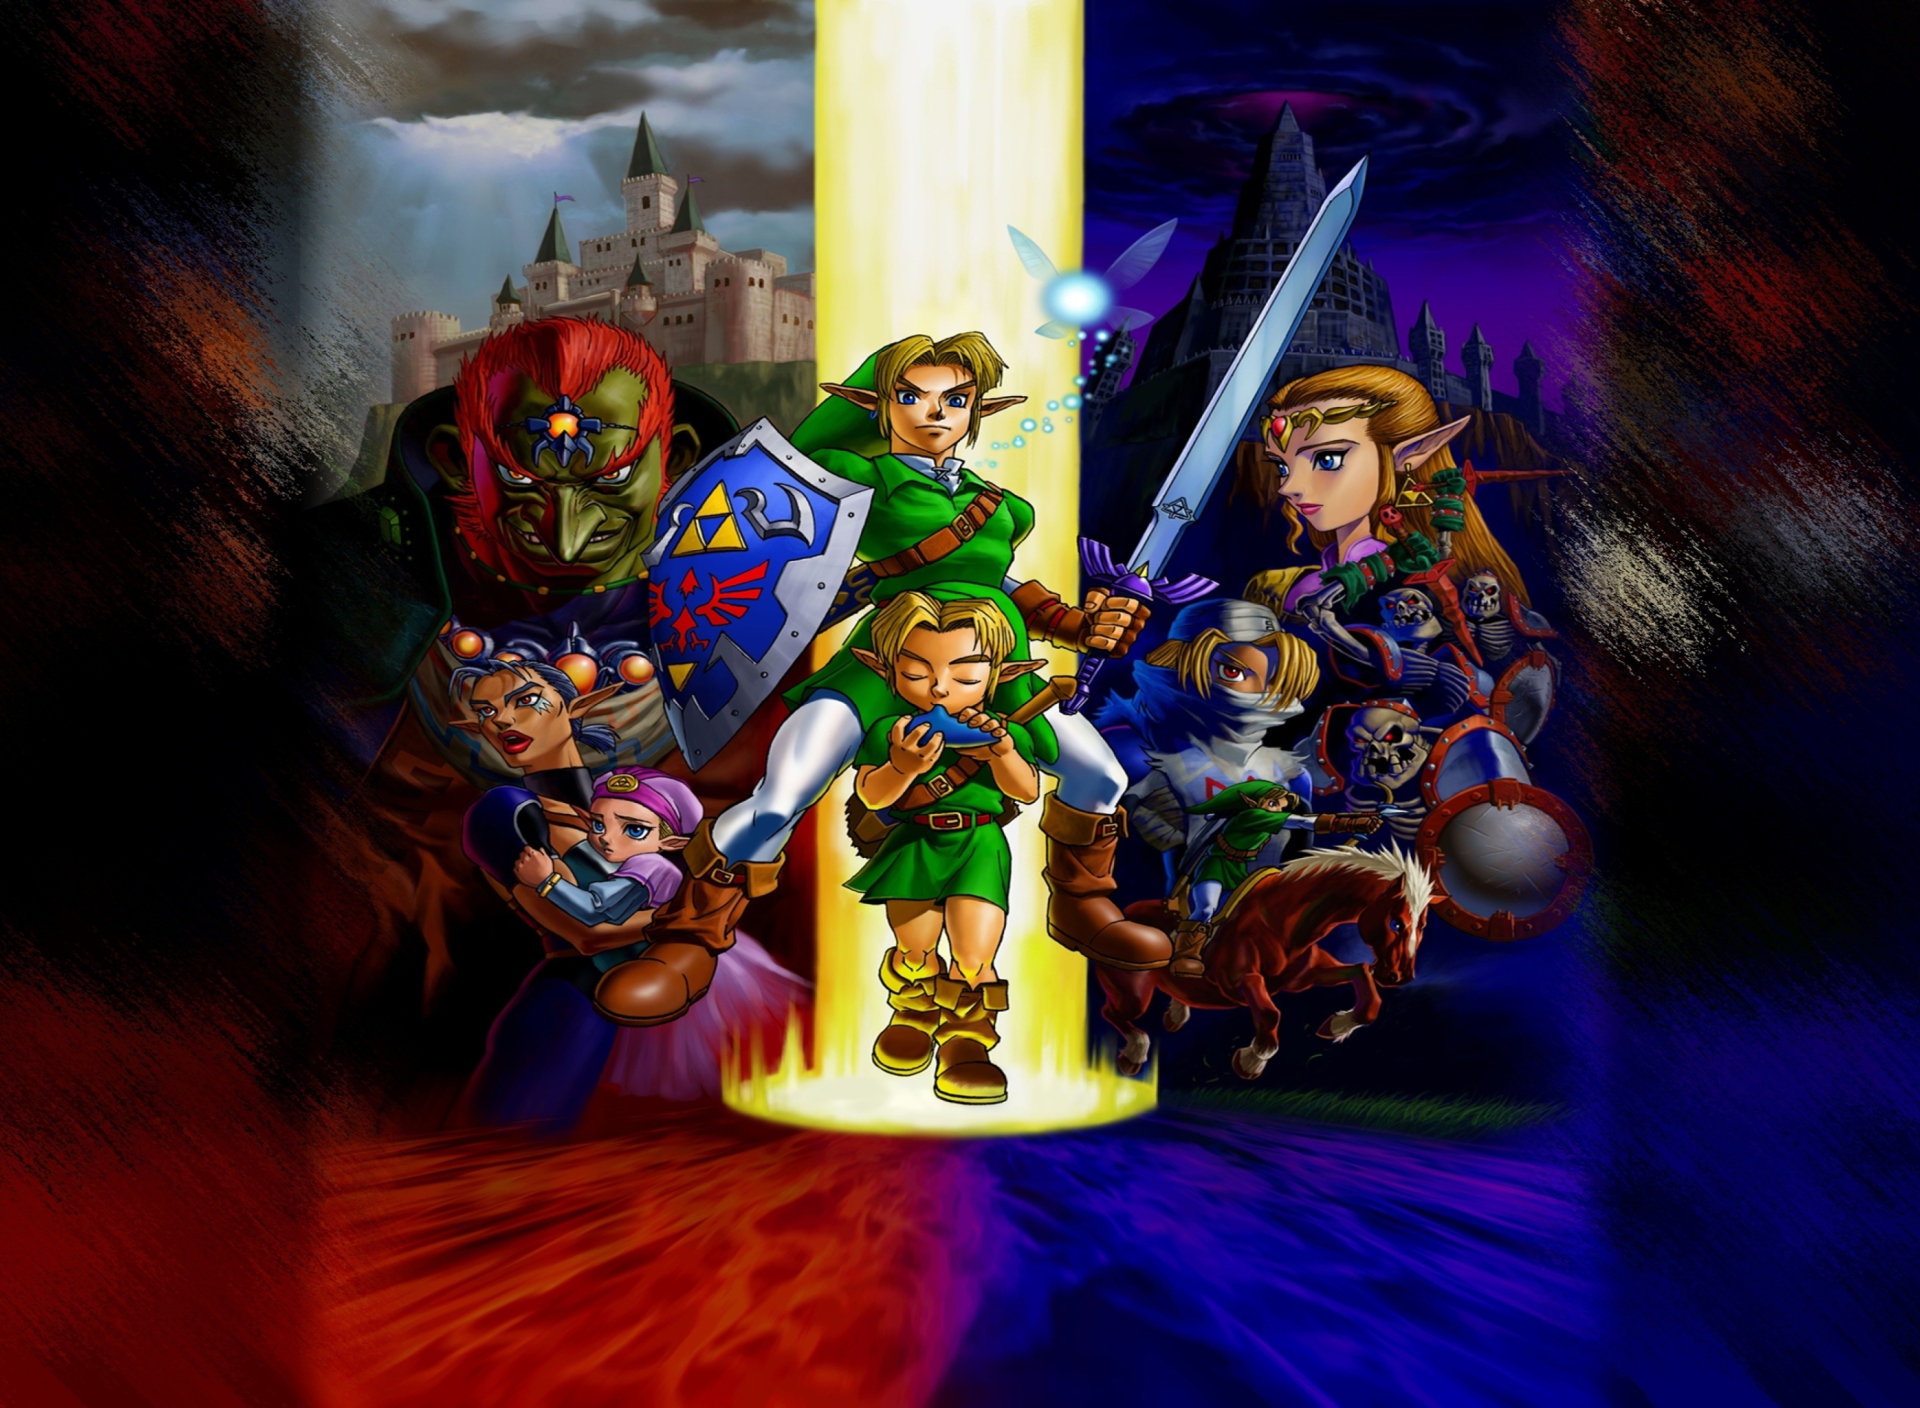 The Legend of Zelda: Ocarina of Time Wallpaper for Huawei P9